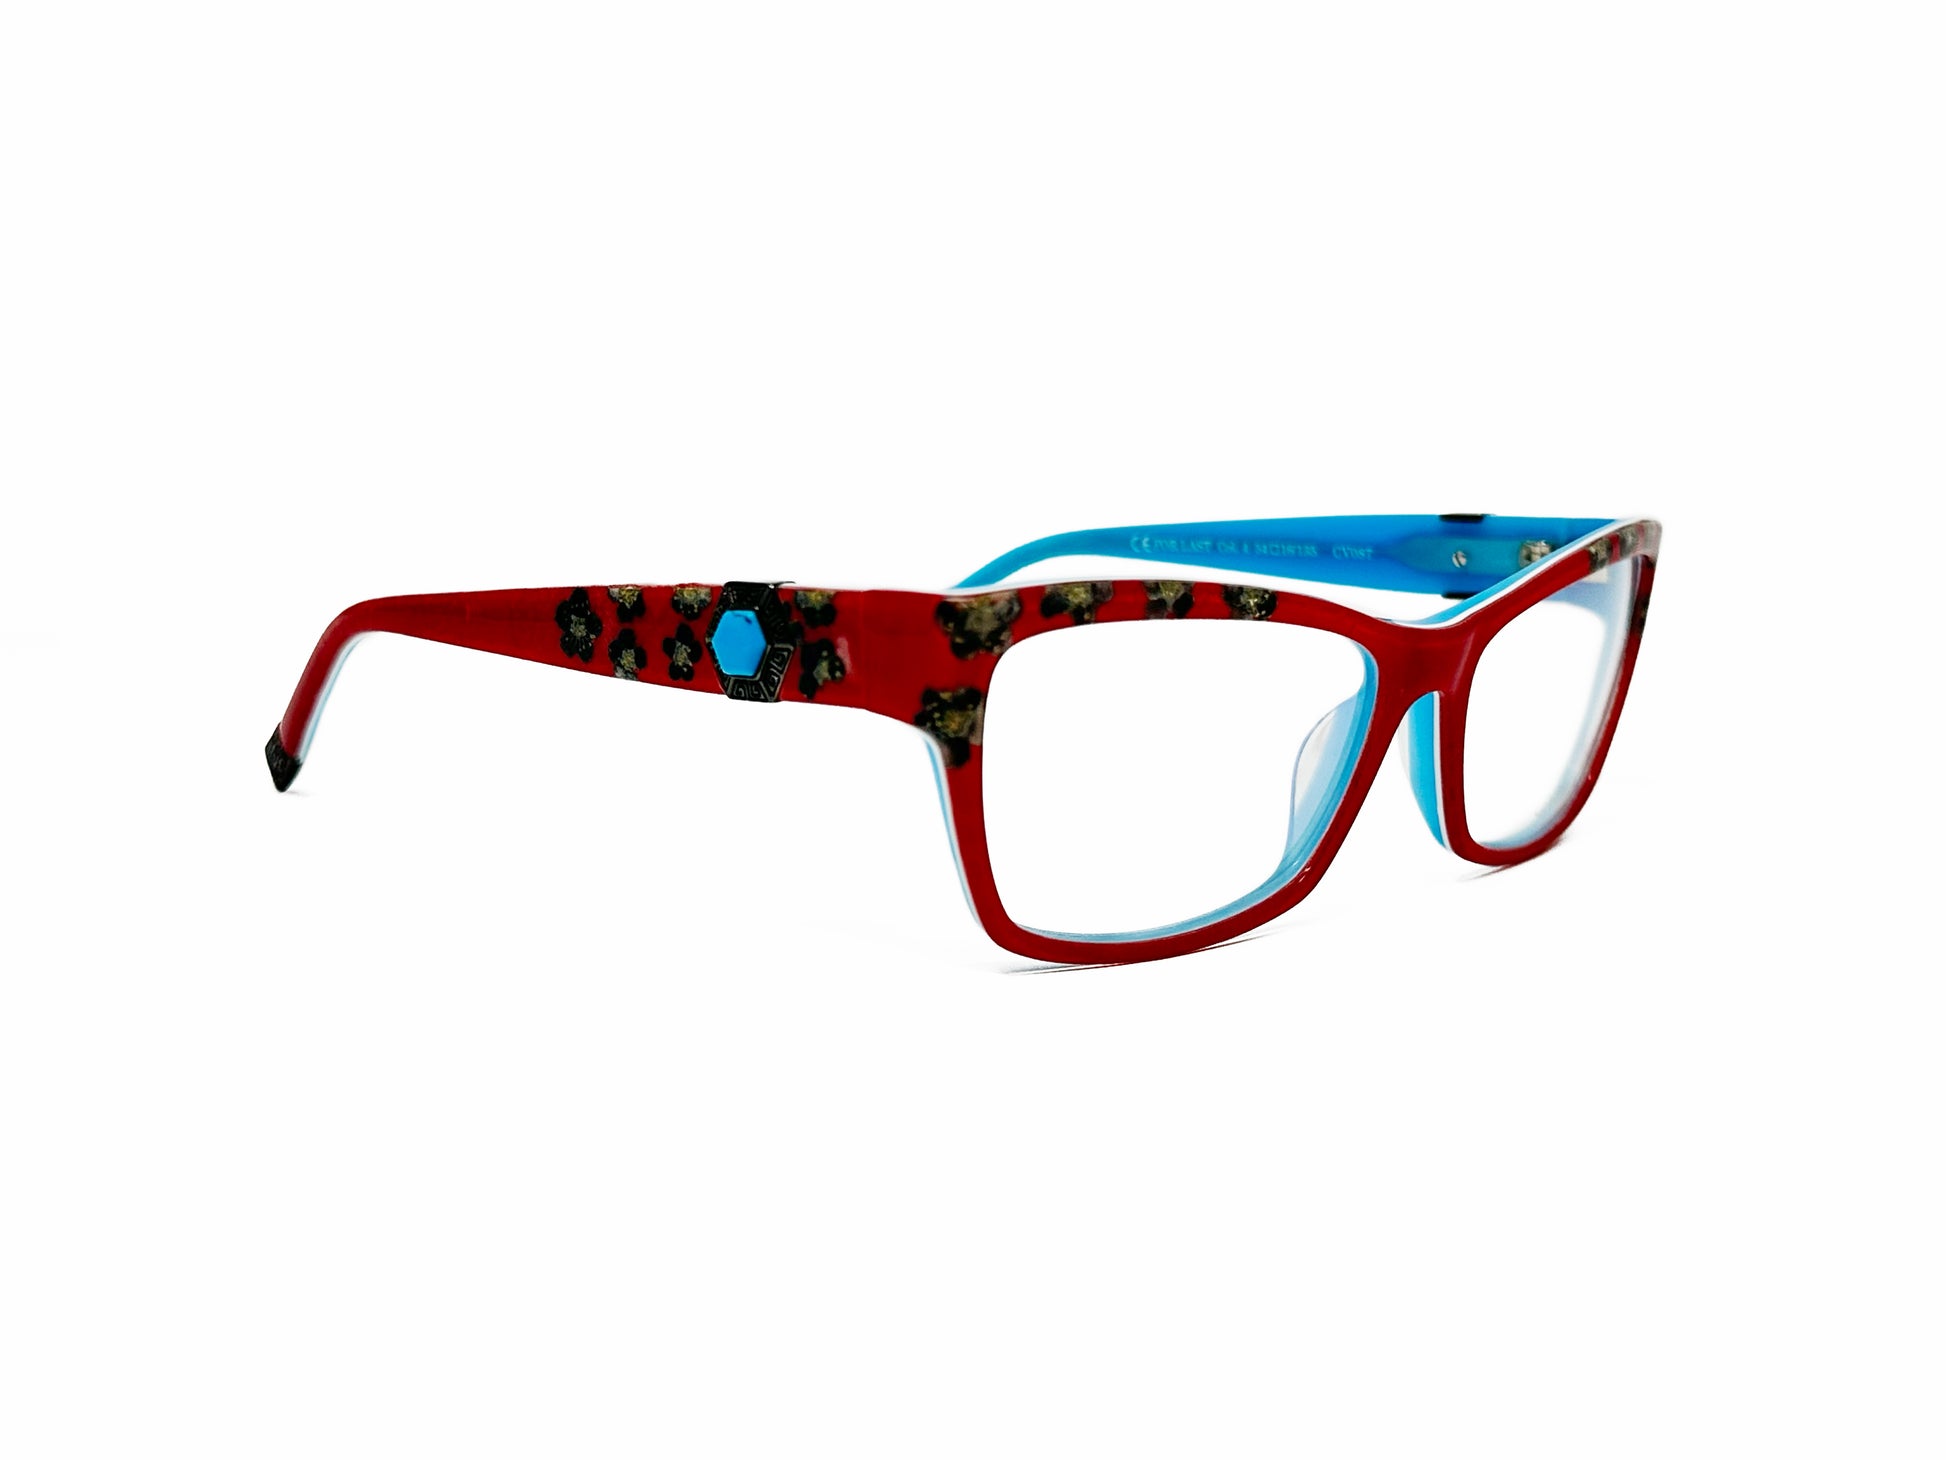 Coco Song upward-angled, rectangular, acetate optical frame. Model: For Last. Color: 4 - Red with gold/black flowers on corners and turquoise gem on temple. Side view.